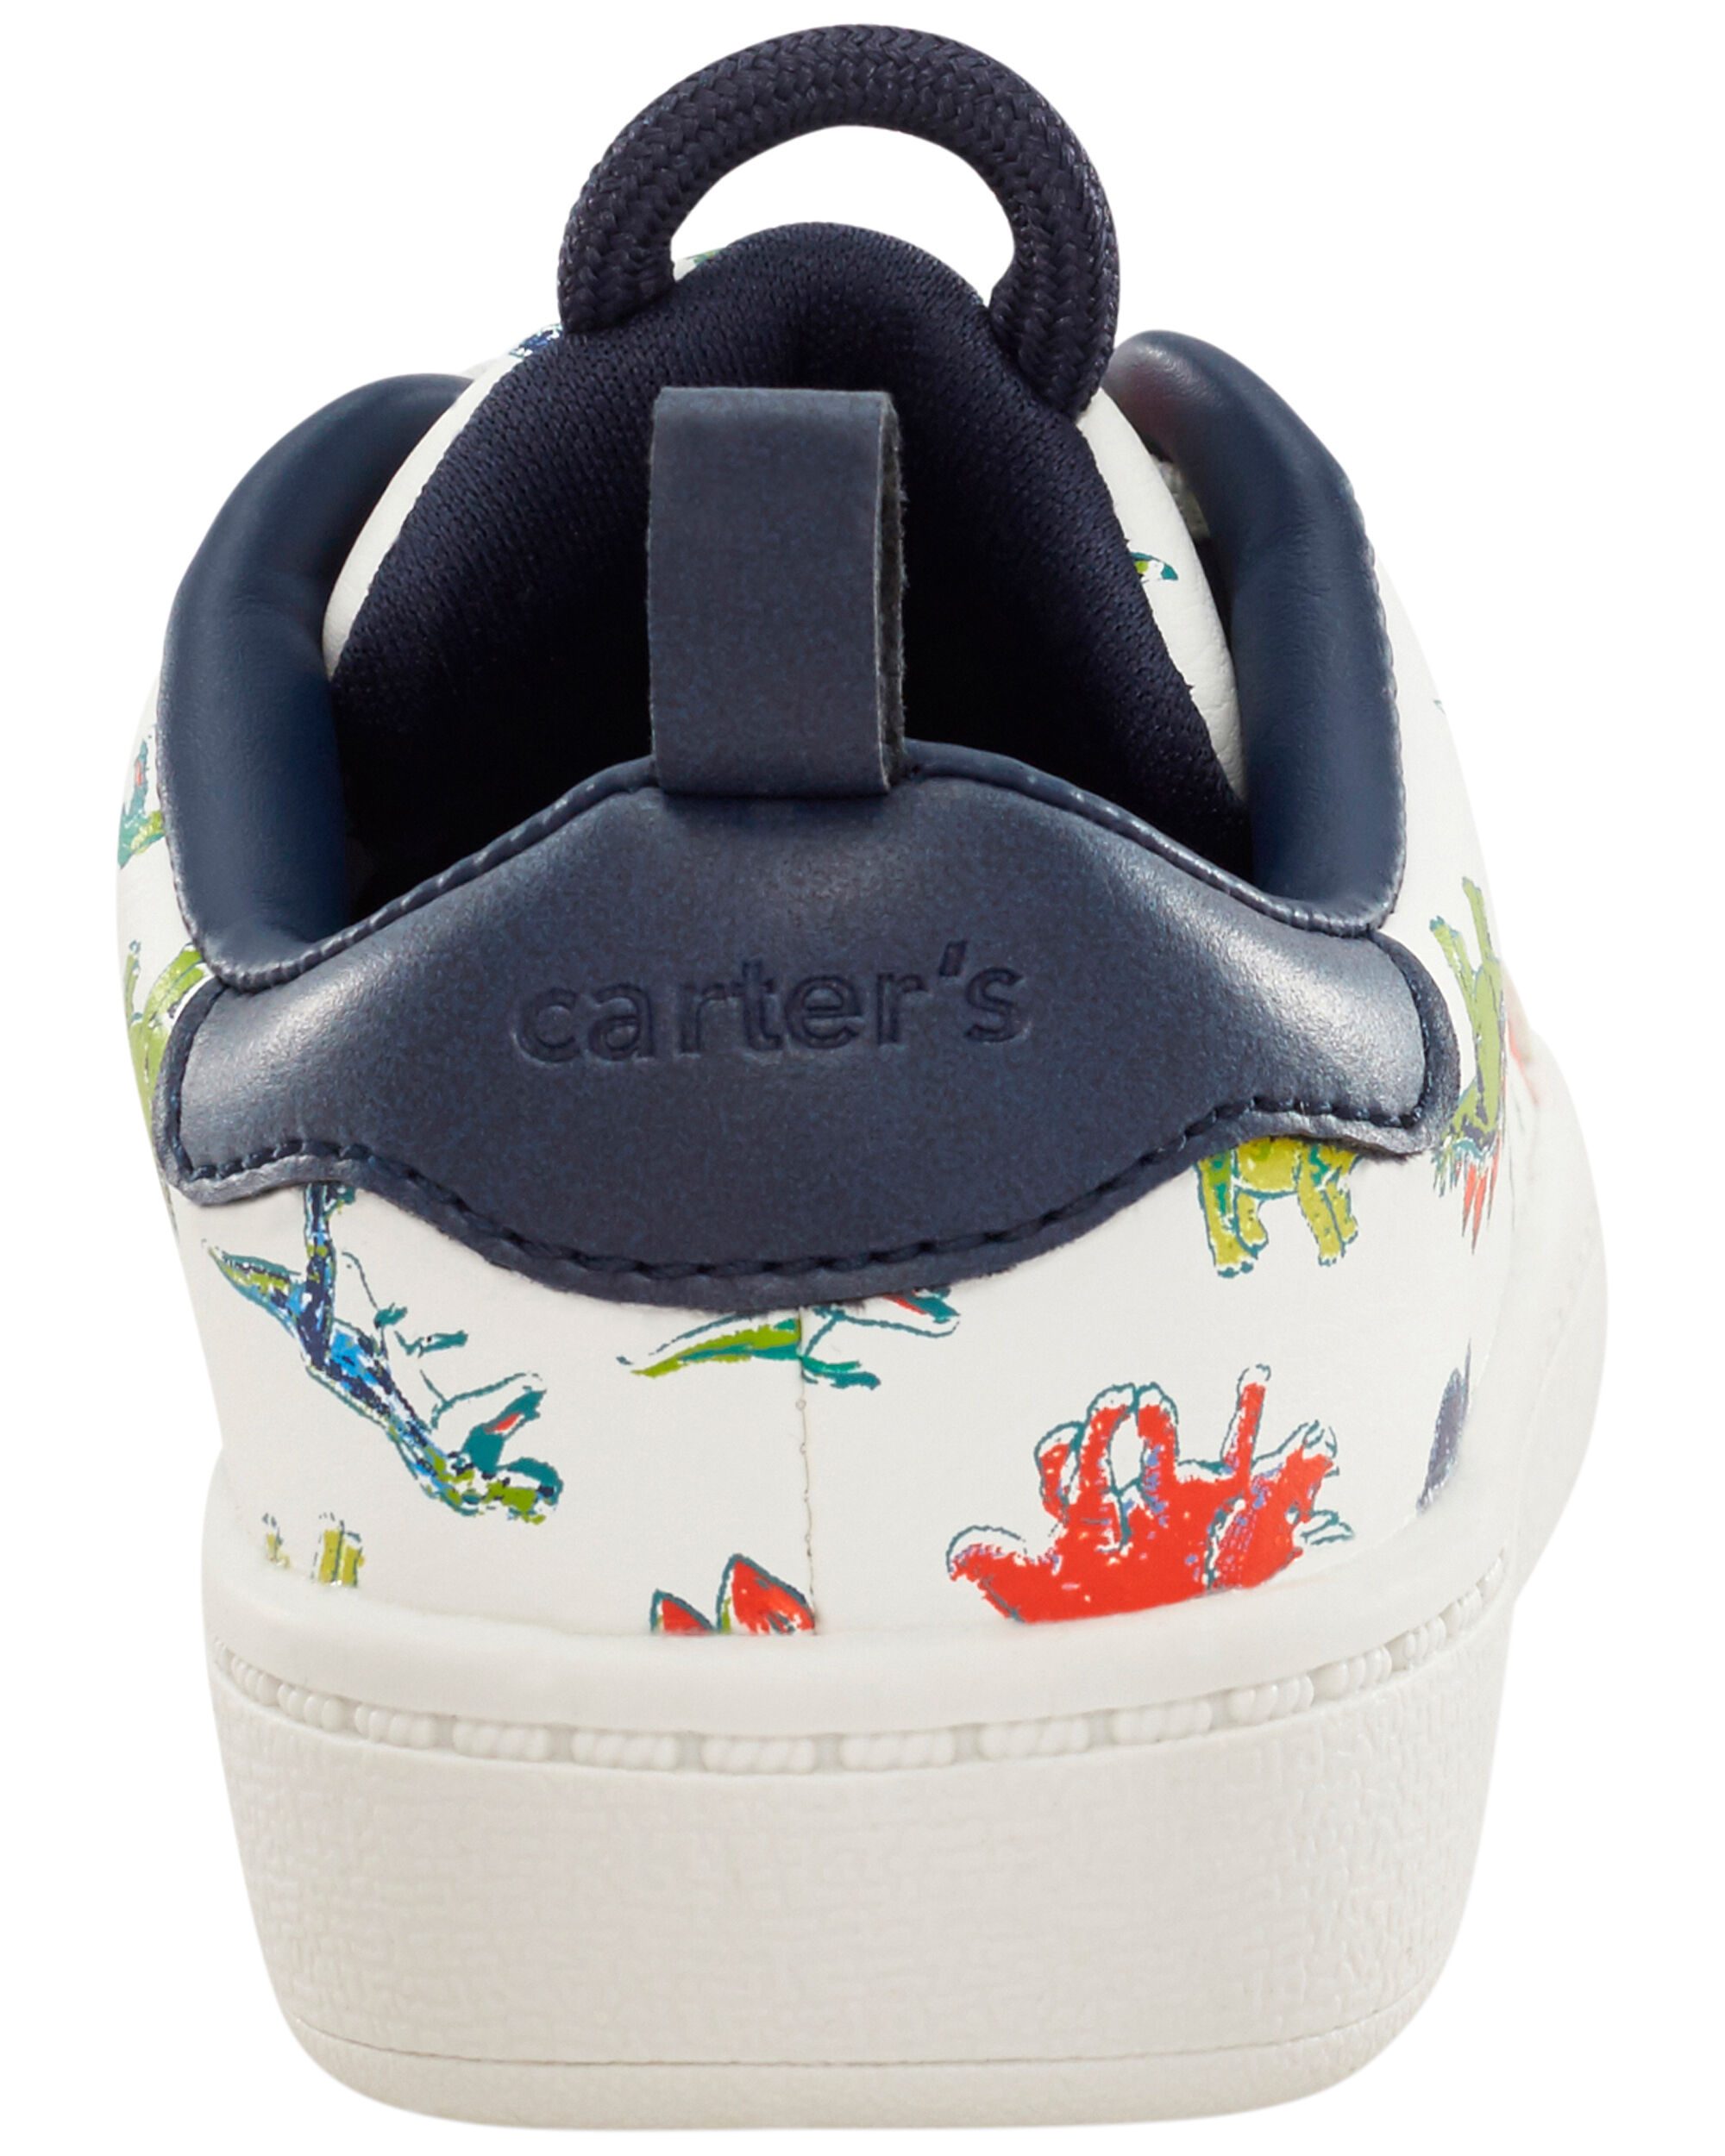 White Toddler Carter's Dinosaur Casual Sneakers | carters.com